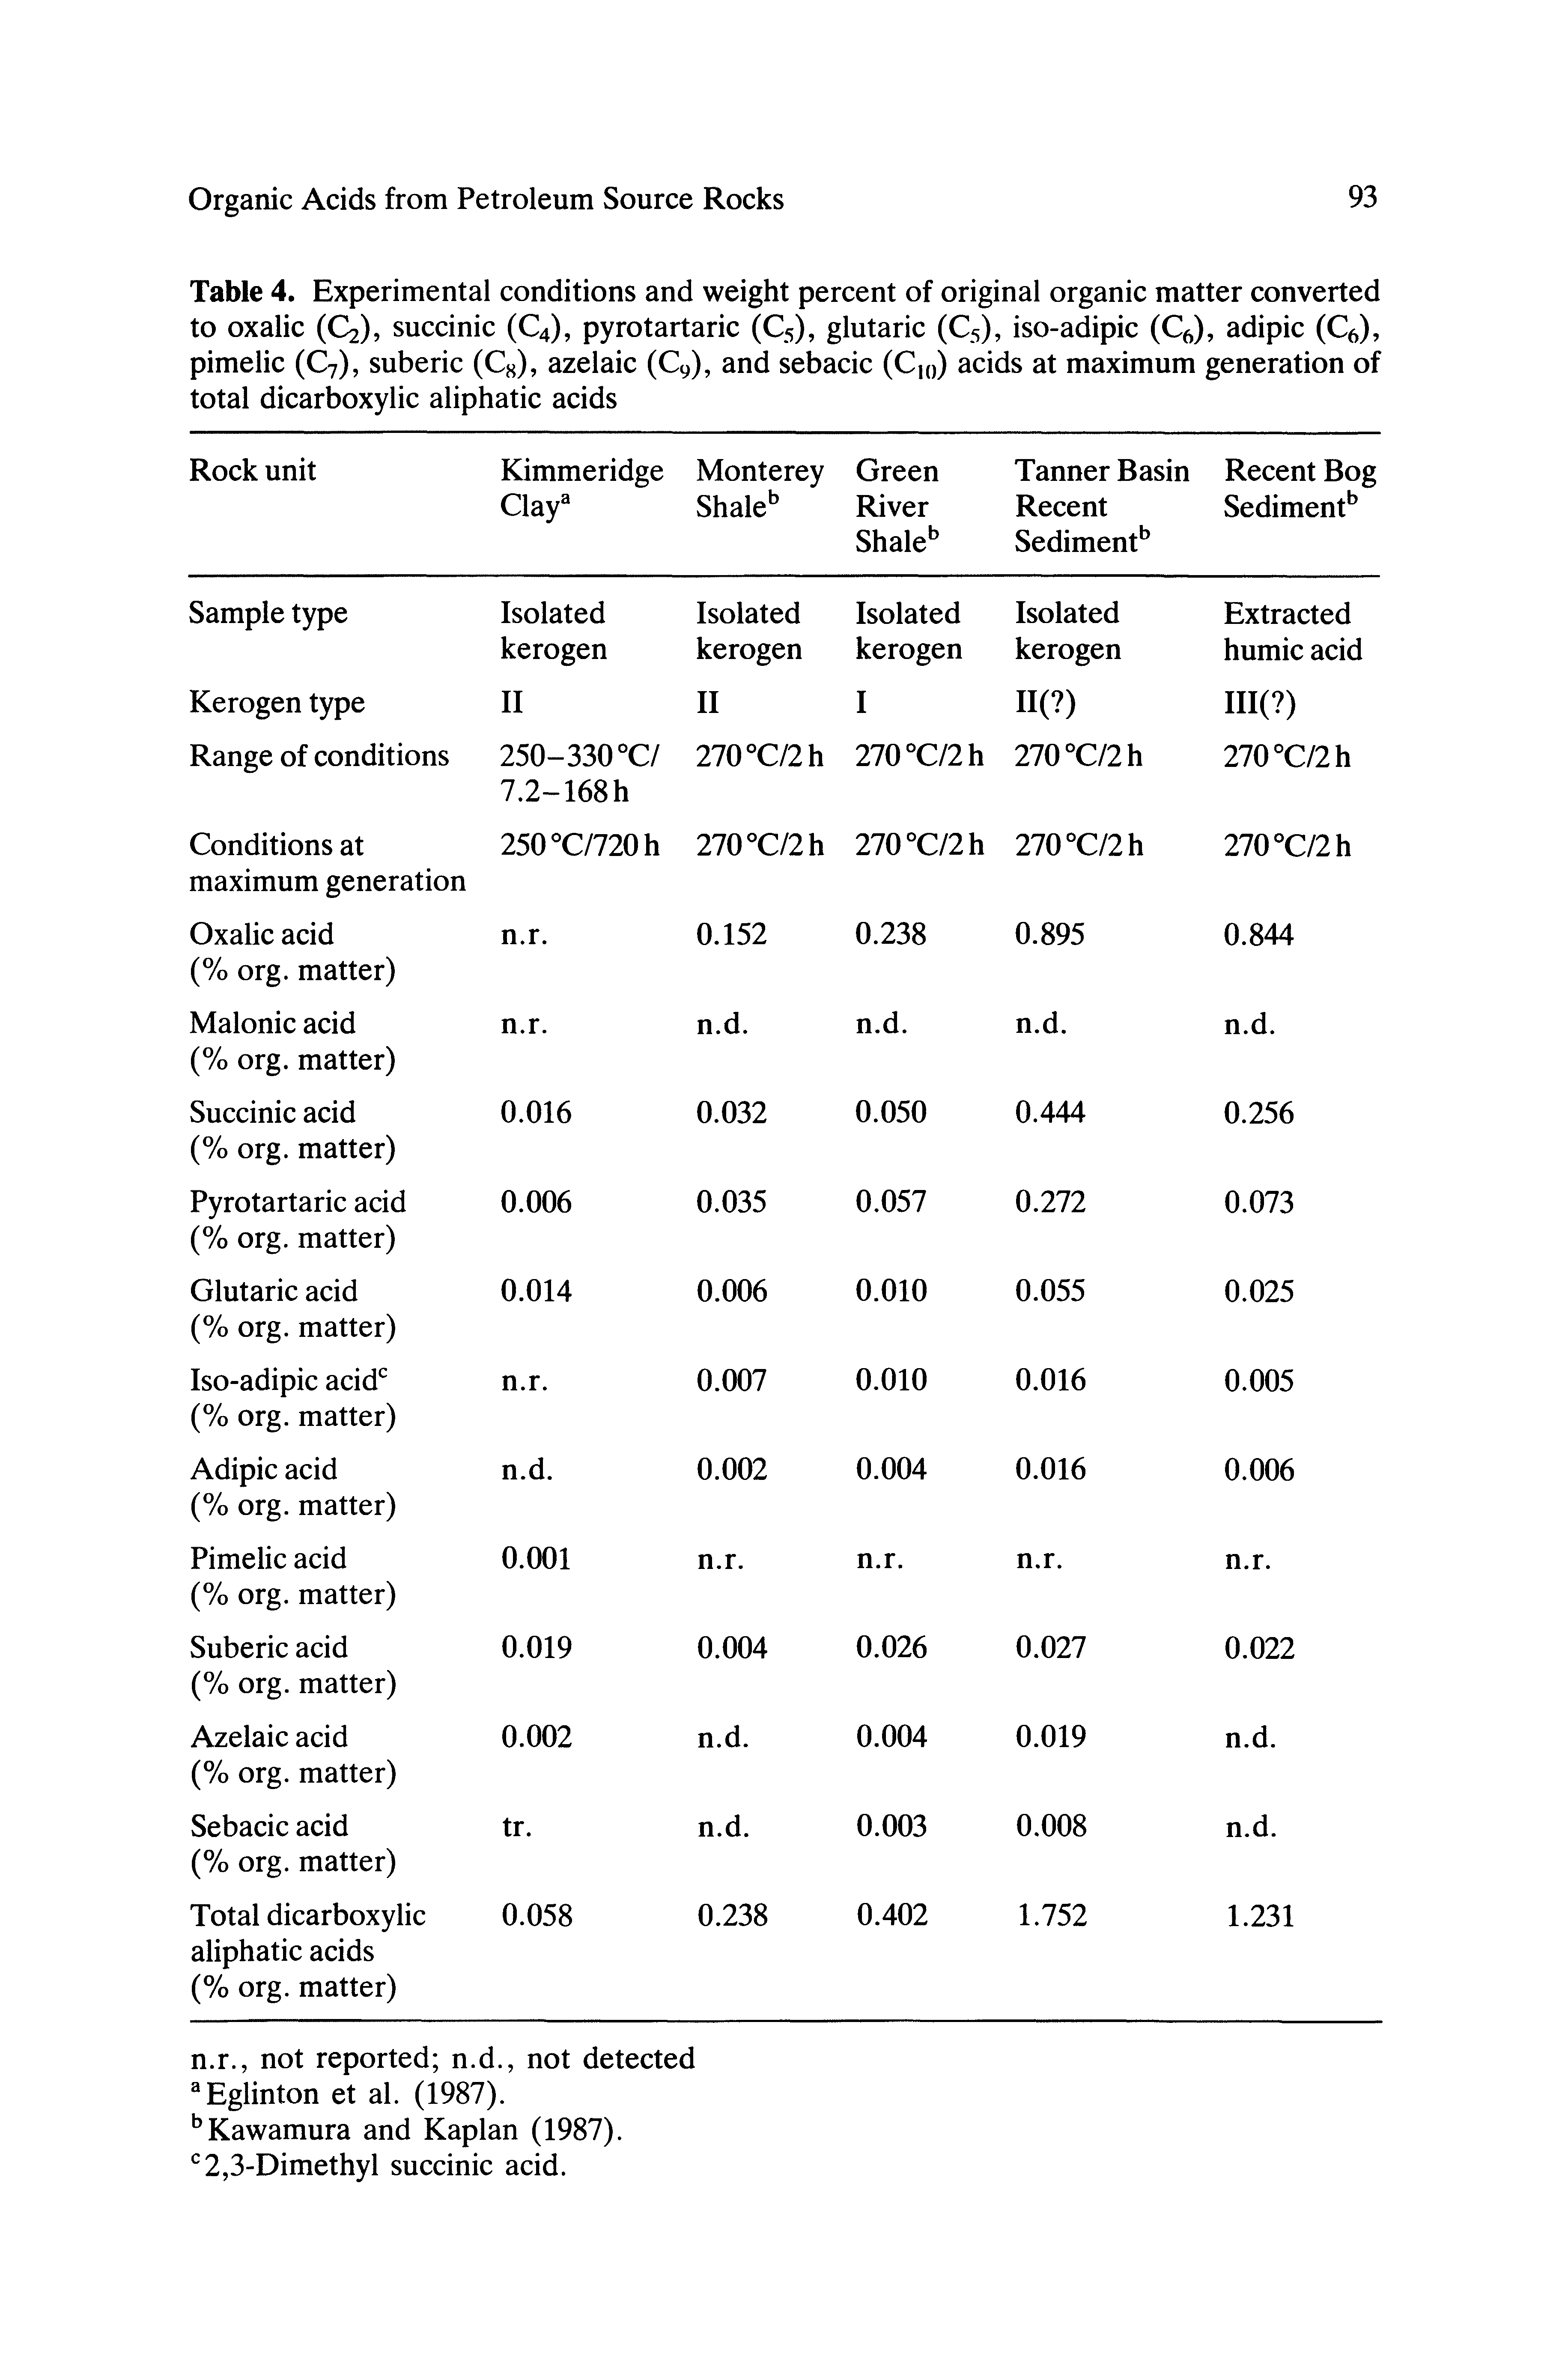 Table 4. Experimental conditions and weight percent of original organic matter converted to oxalic (Q), succinic (C4), pyrotartaric (C5), glutaric (C5), iso-adipic (Q), adipic (C6), pimelic (C7), suberic (Cg), azelaic (C9), and sebacic (Ciq) acids at maximum generation of total dicarboxylic aliphatic acids...